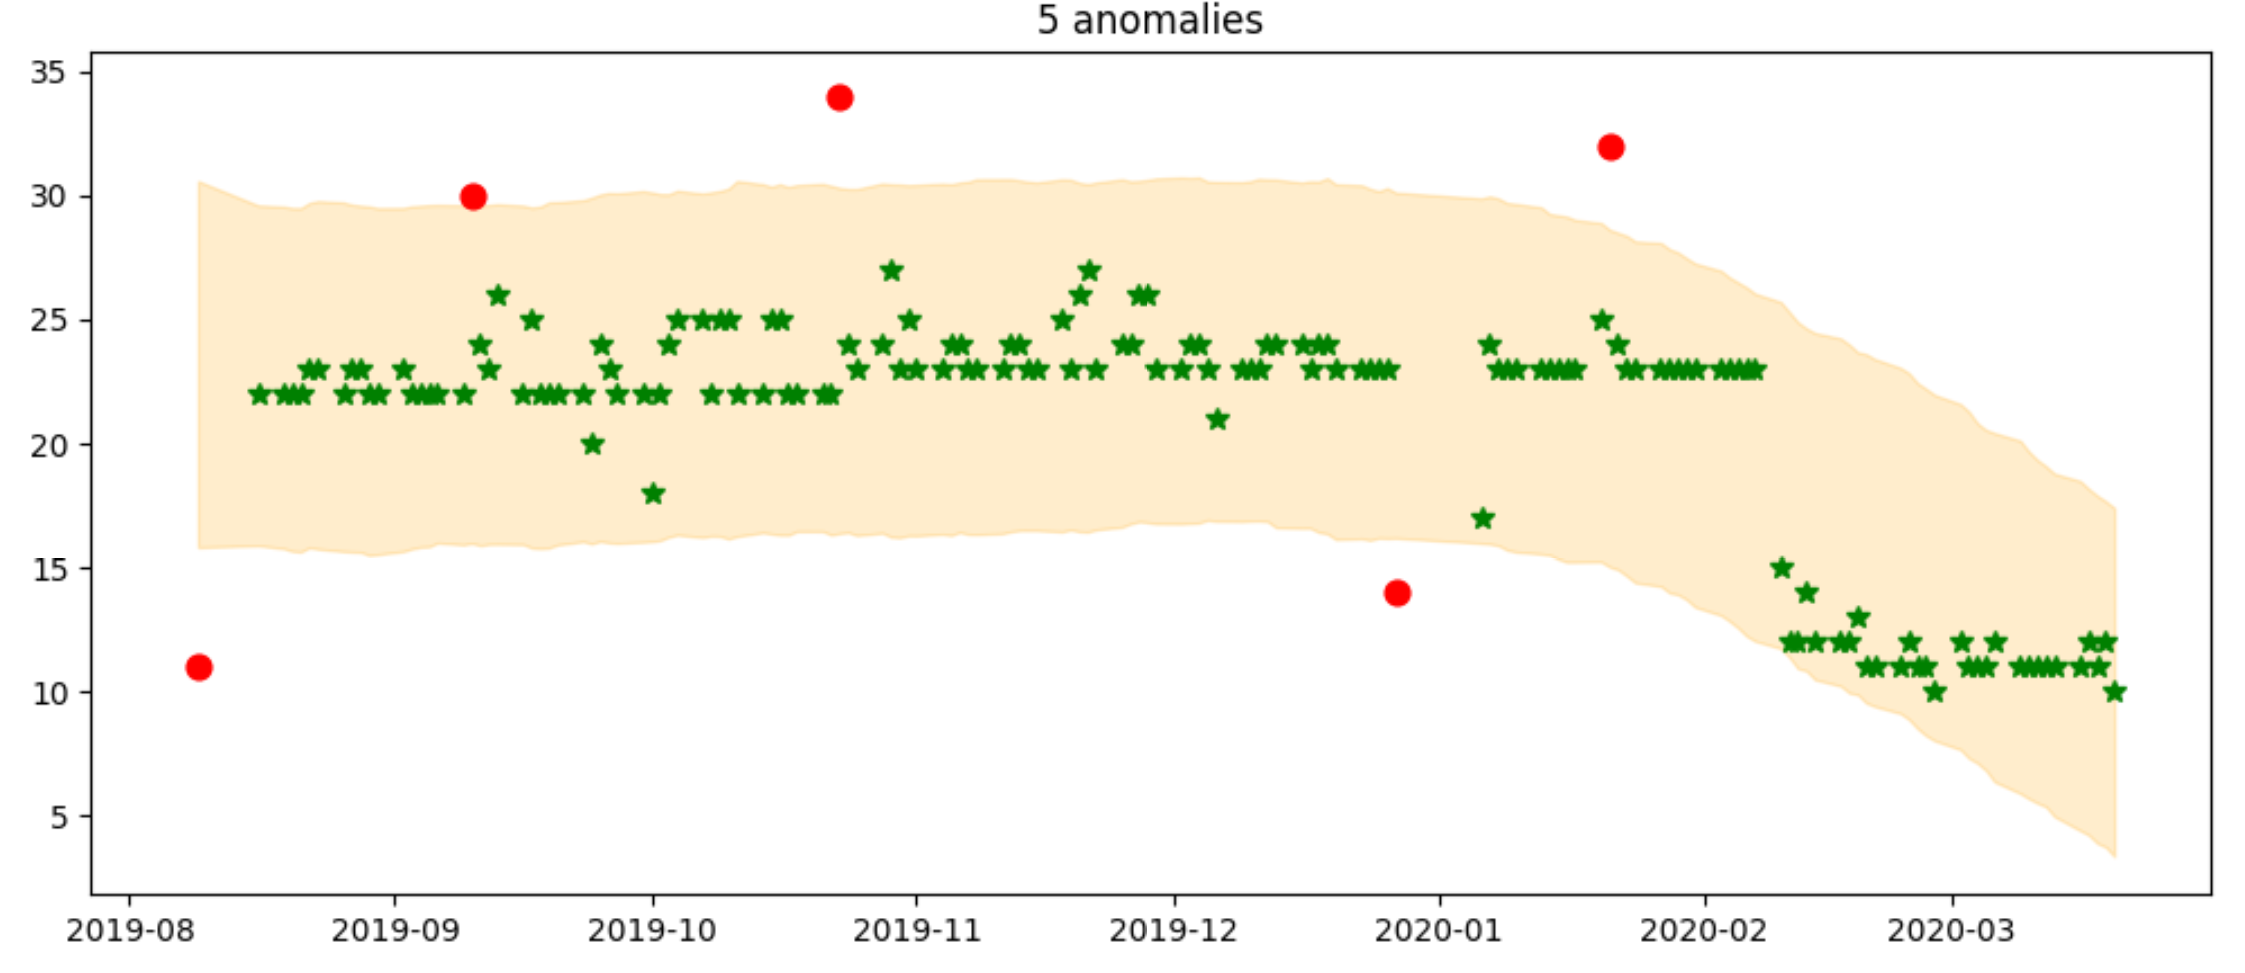 Illustrates anomalies detected outside a predictable trend.